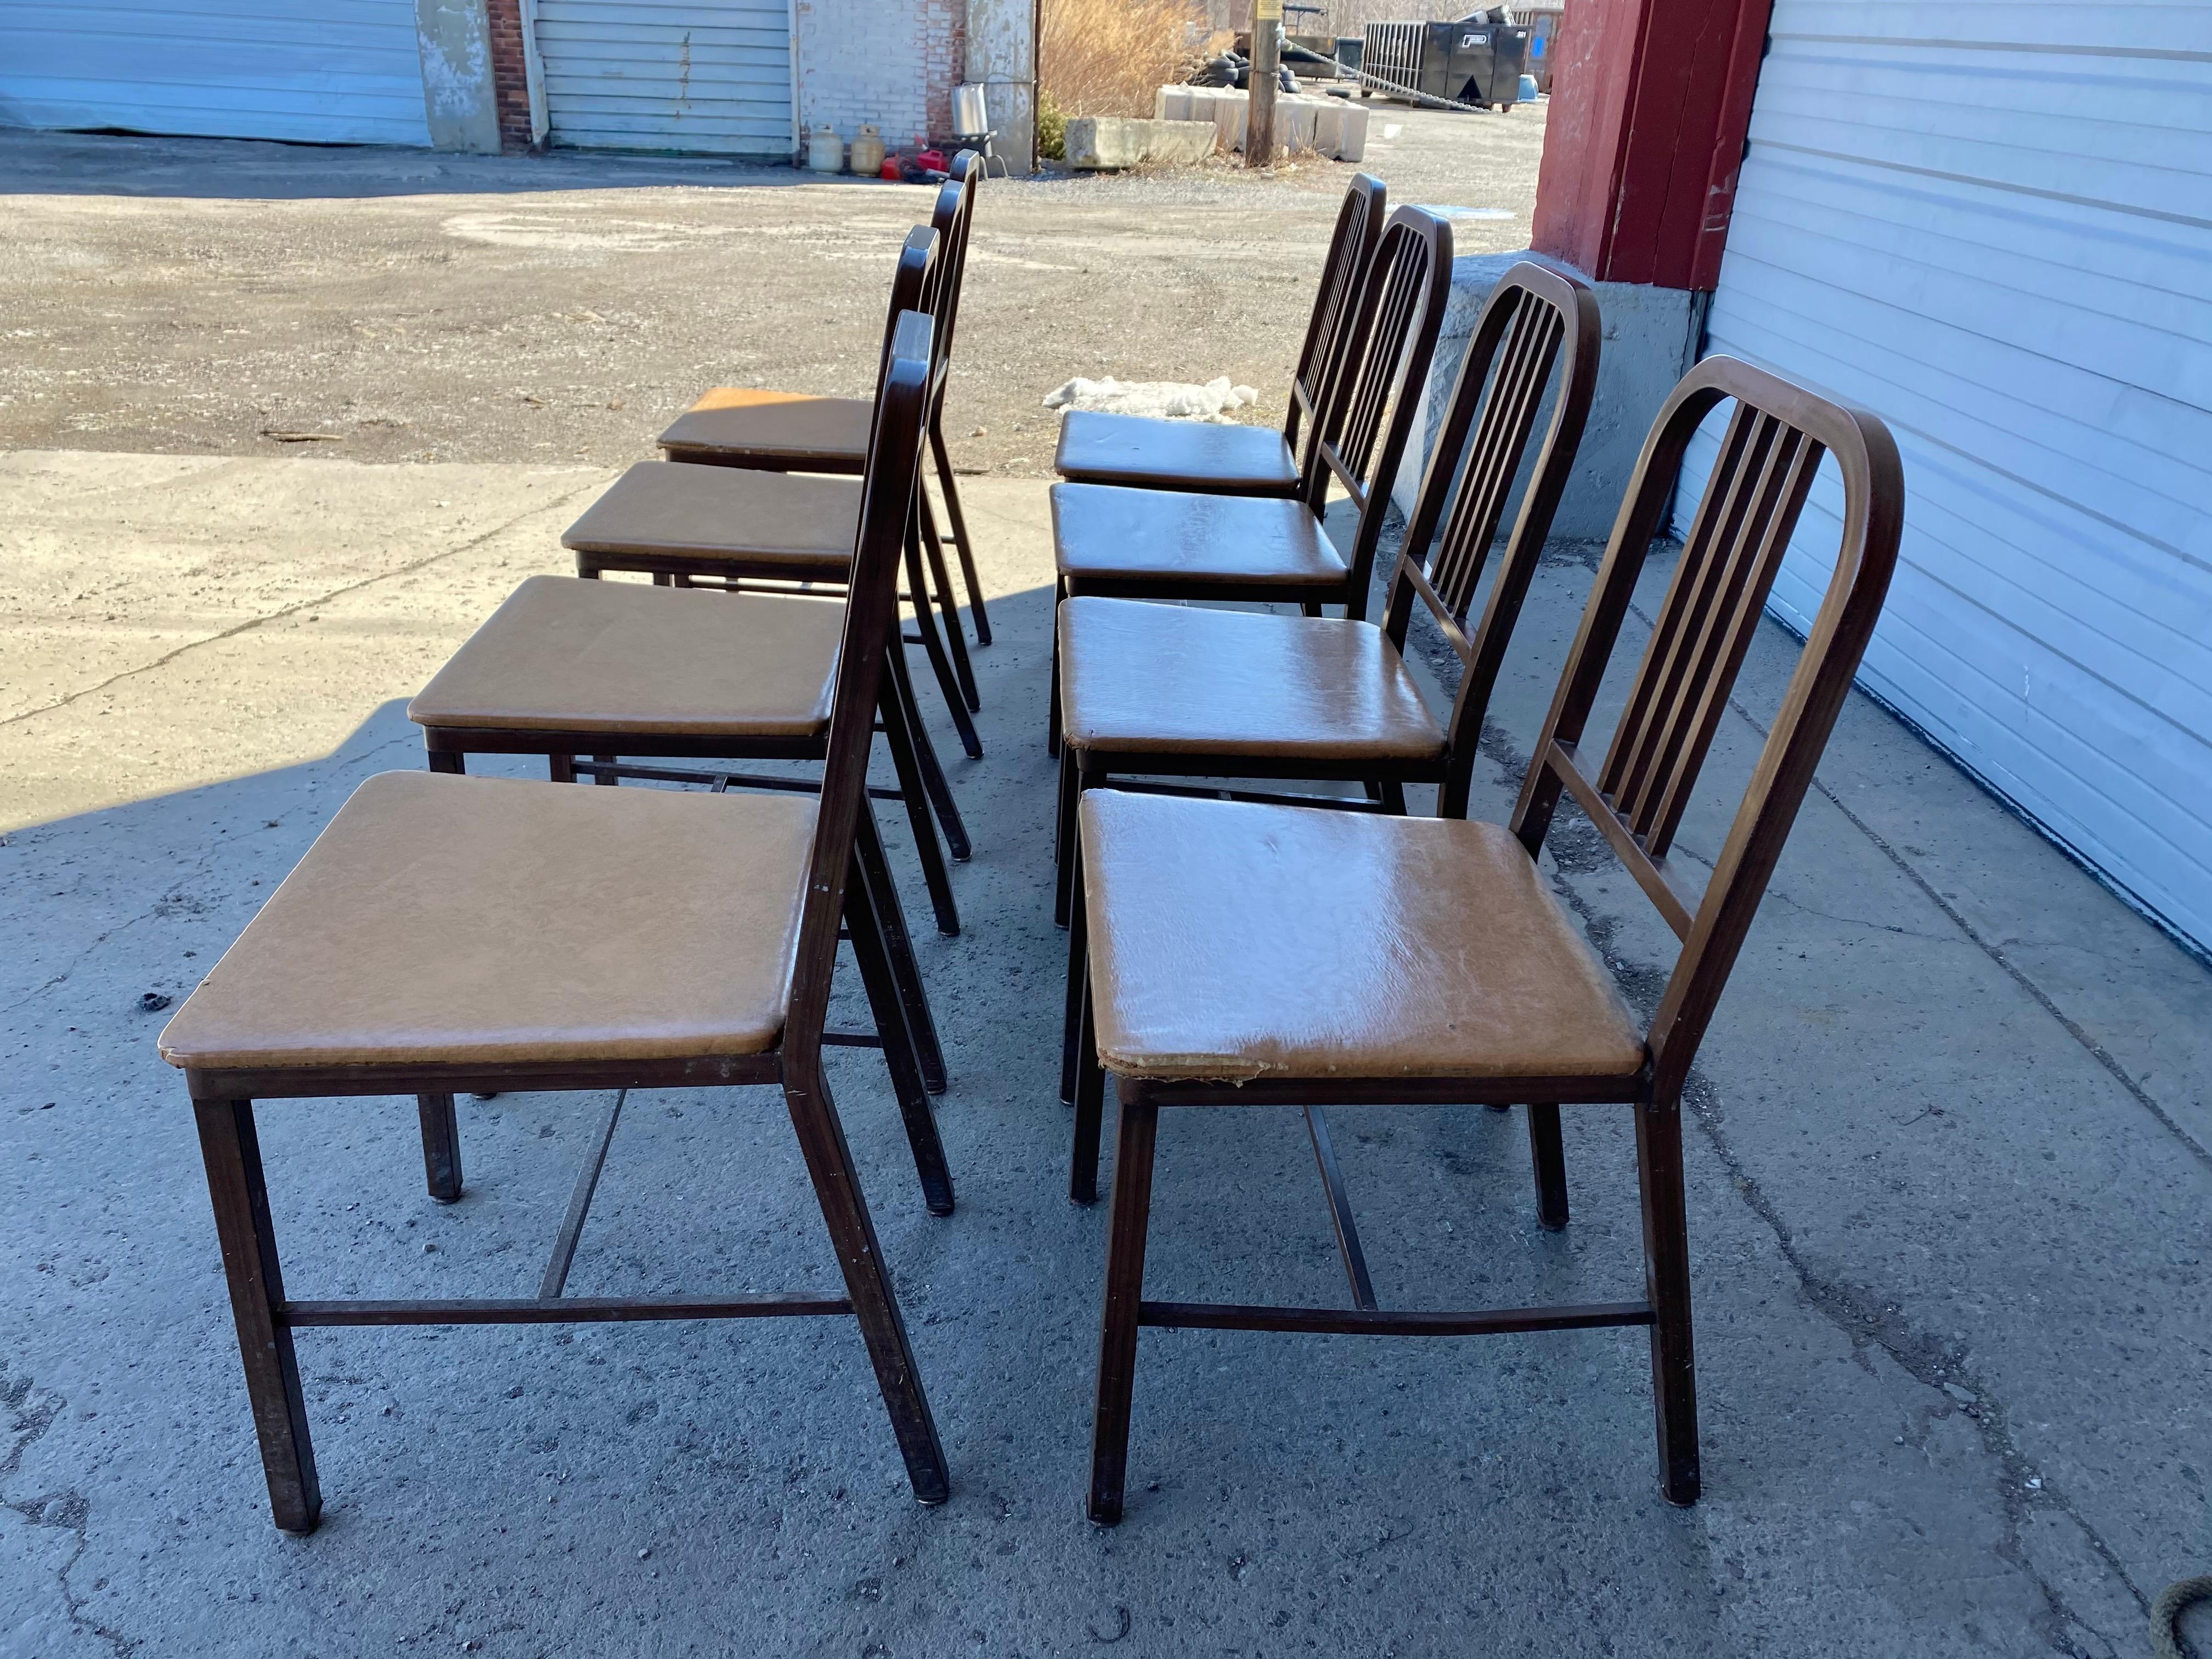 Painted Set of 8 Classic Industrial Metal Side Chairs Made by HARD MFG CO For Sale